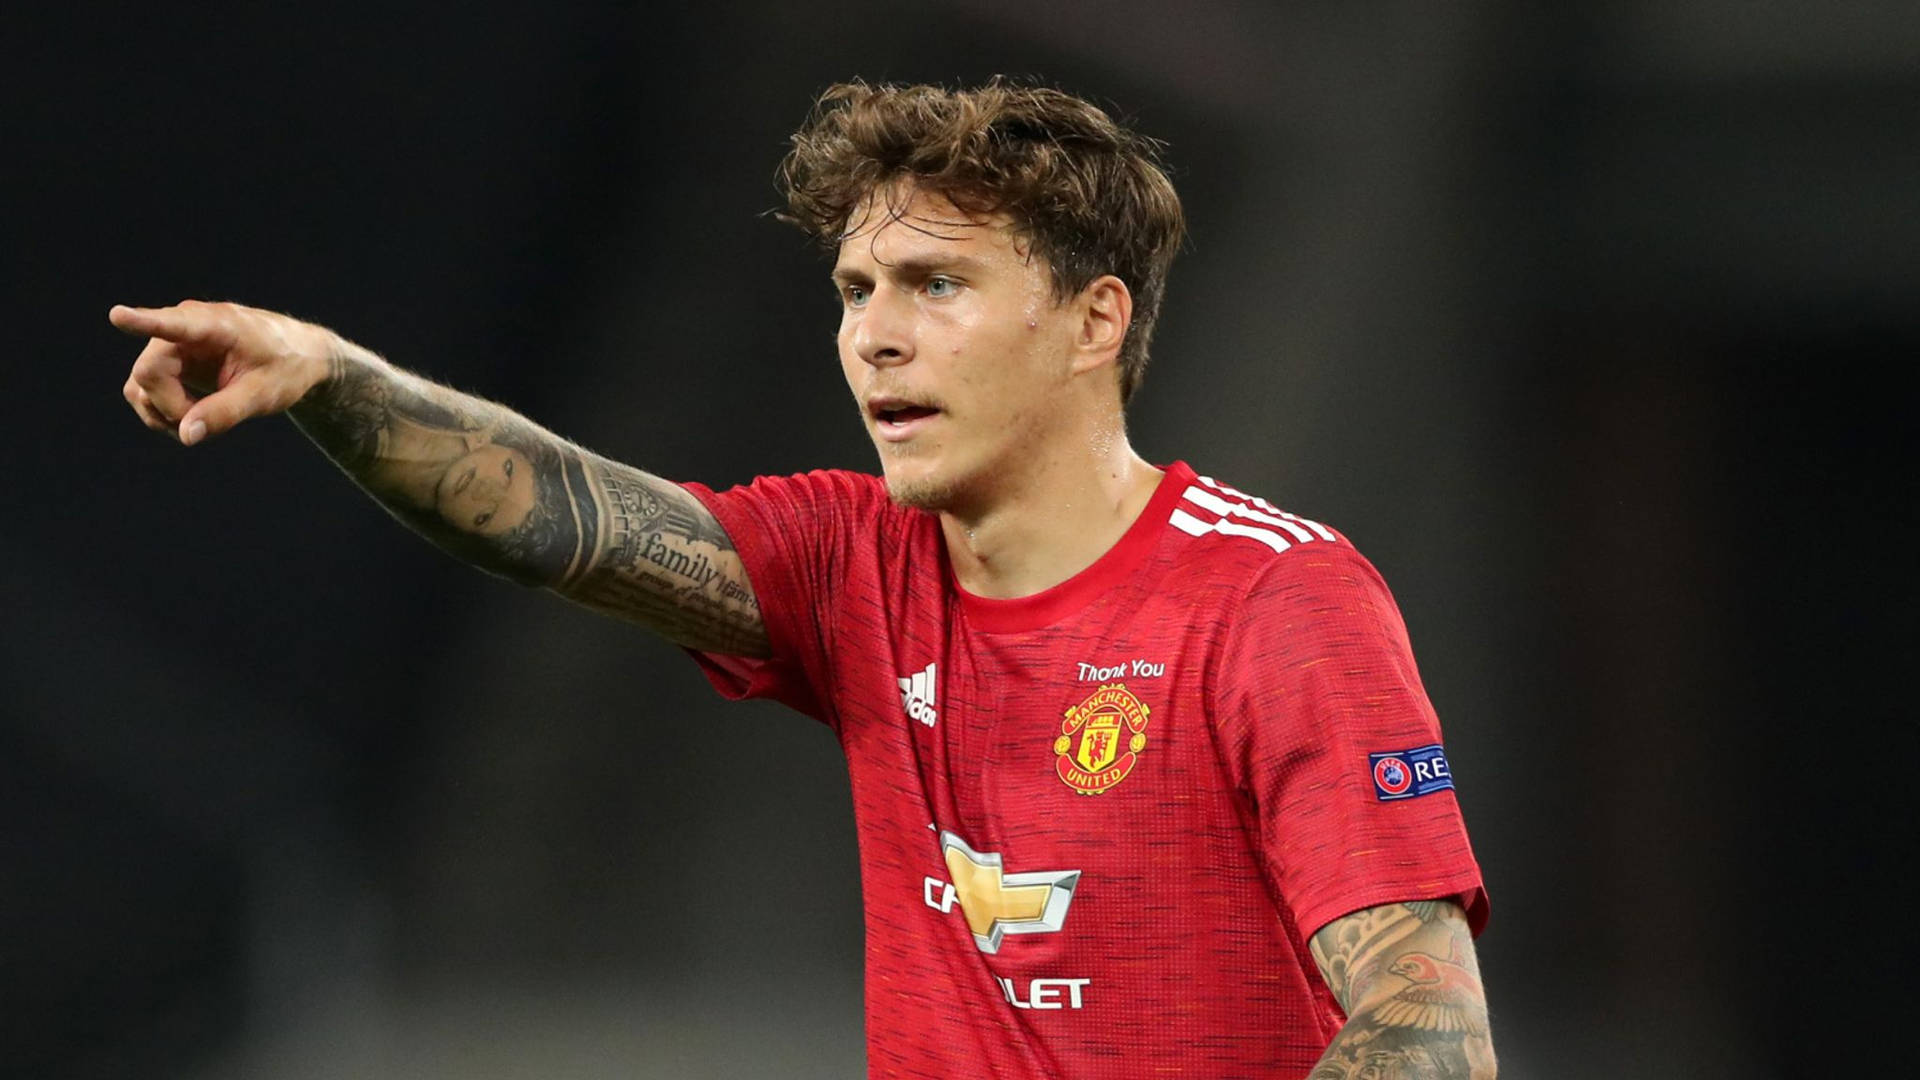 Victor Lindelof In Action During A Football Match Wallpaper